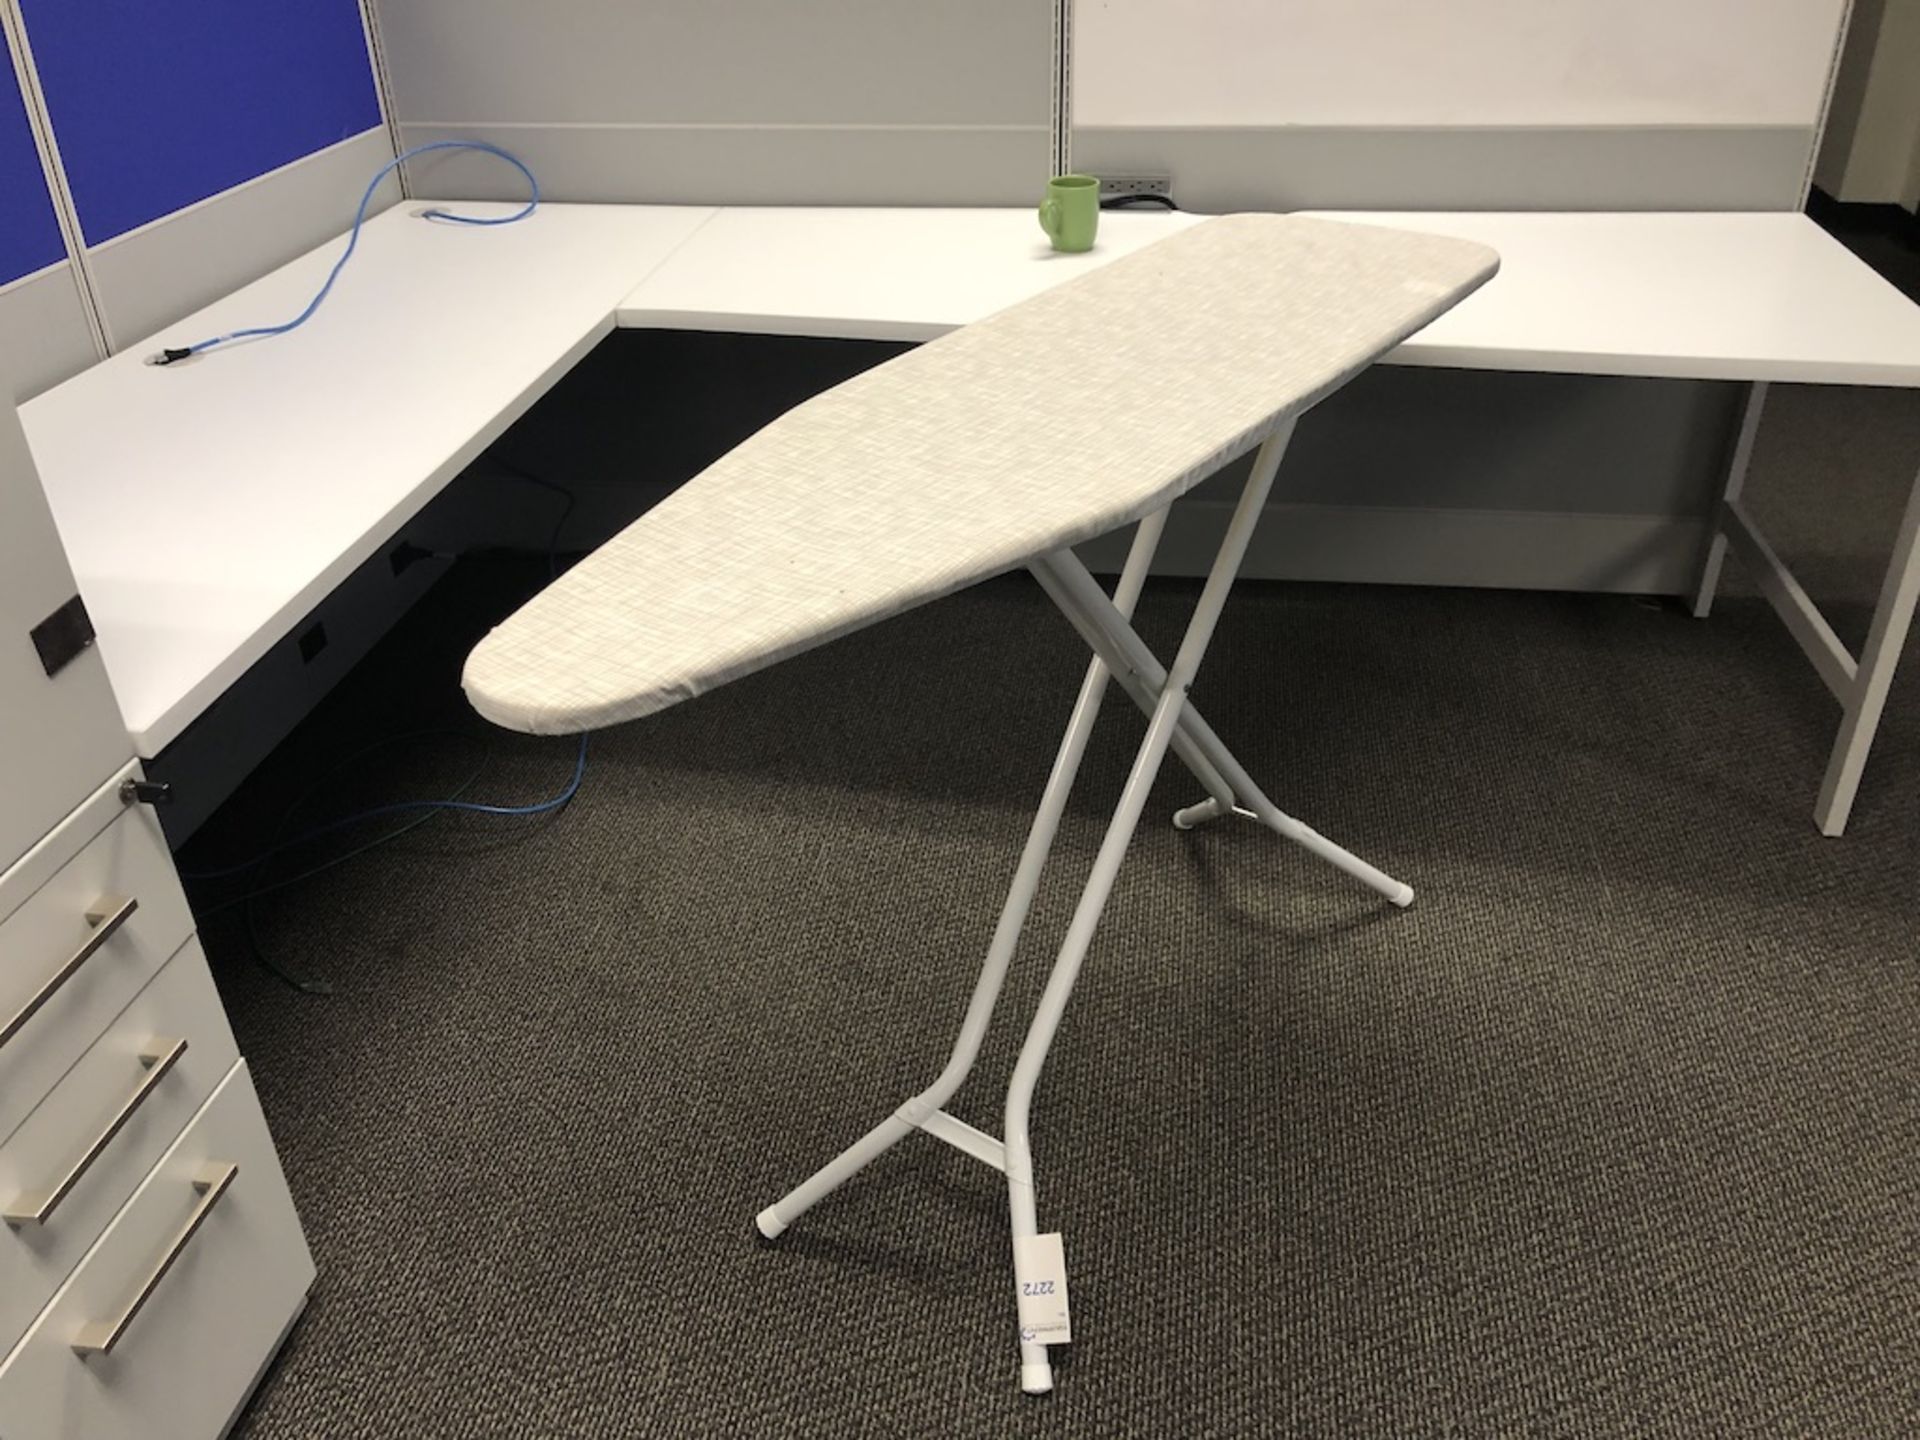 IRONING BOARD 54IN L X 14IN W X 3FT H   SCHNEIDER ELECTRIC- 6611 PRESTON AVE SUITE A - Image 2 of 4